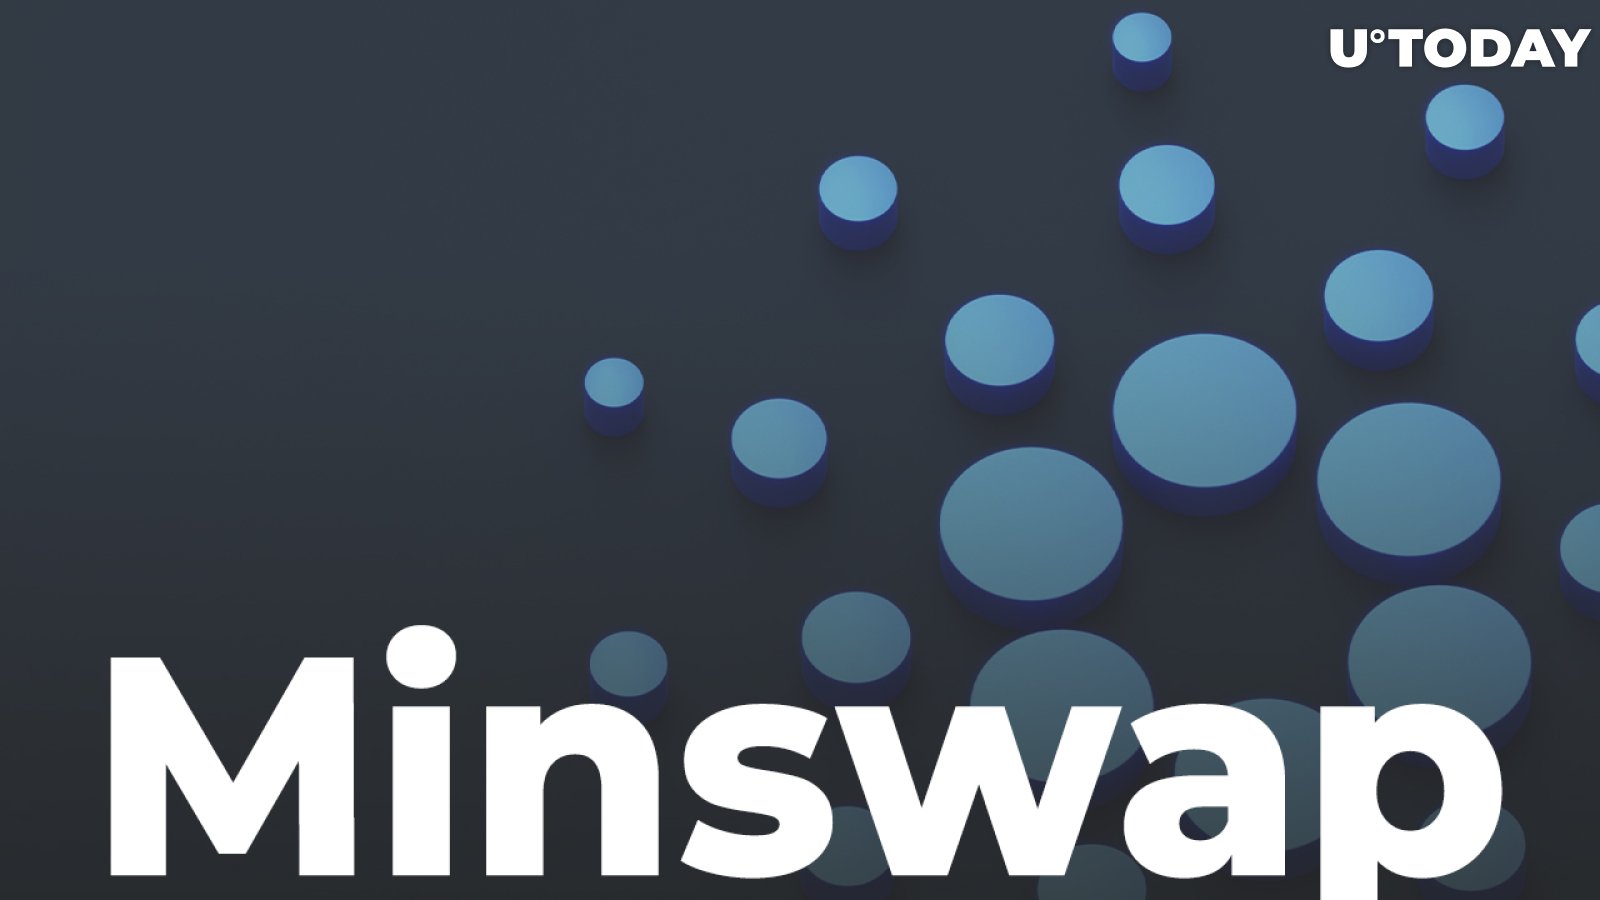 Cardano's Minswap Experiencing Issues, But Funds Are Safe